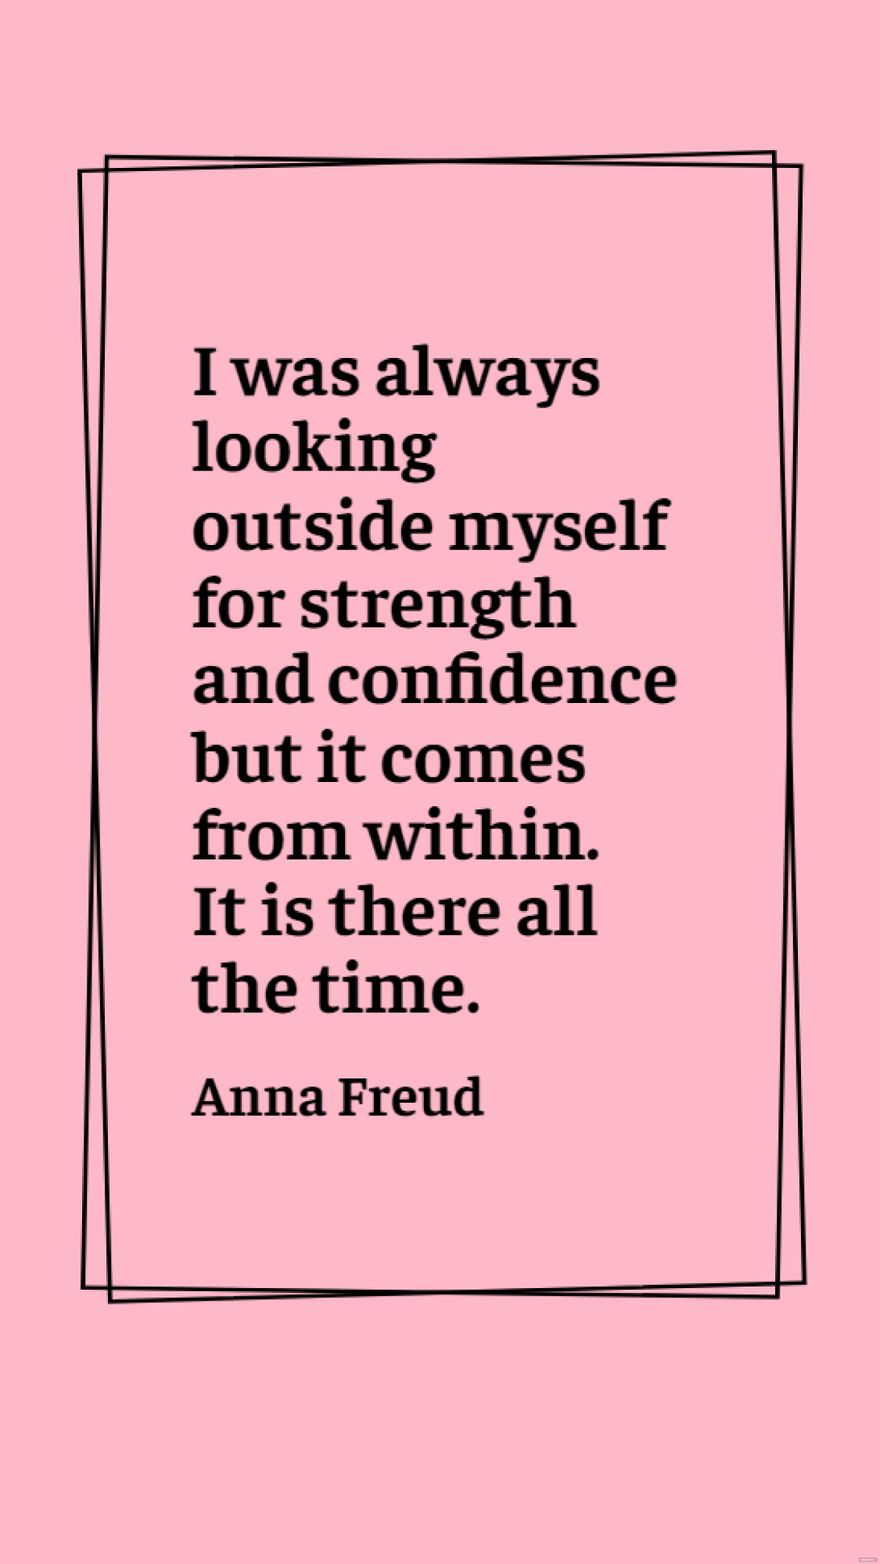 Anna Freud - I was always looking outside myself for strength and confidence but it comes from within. It is there all the time.